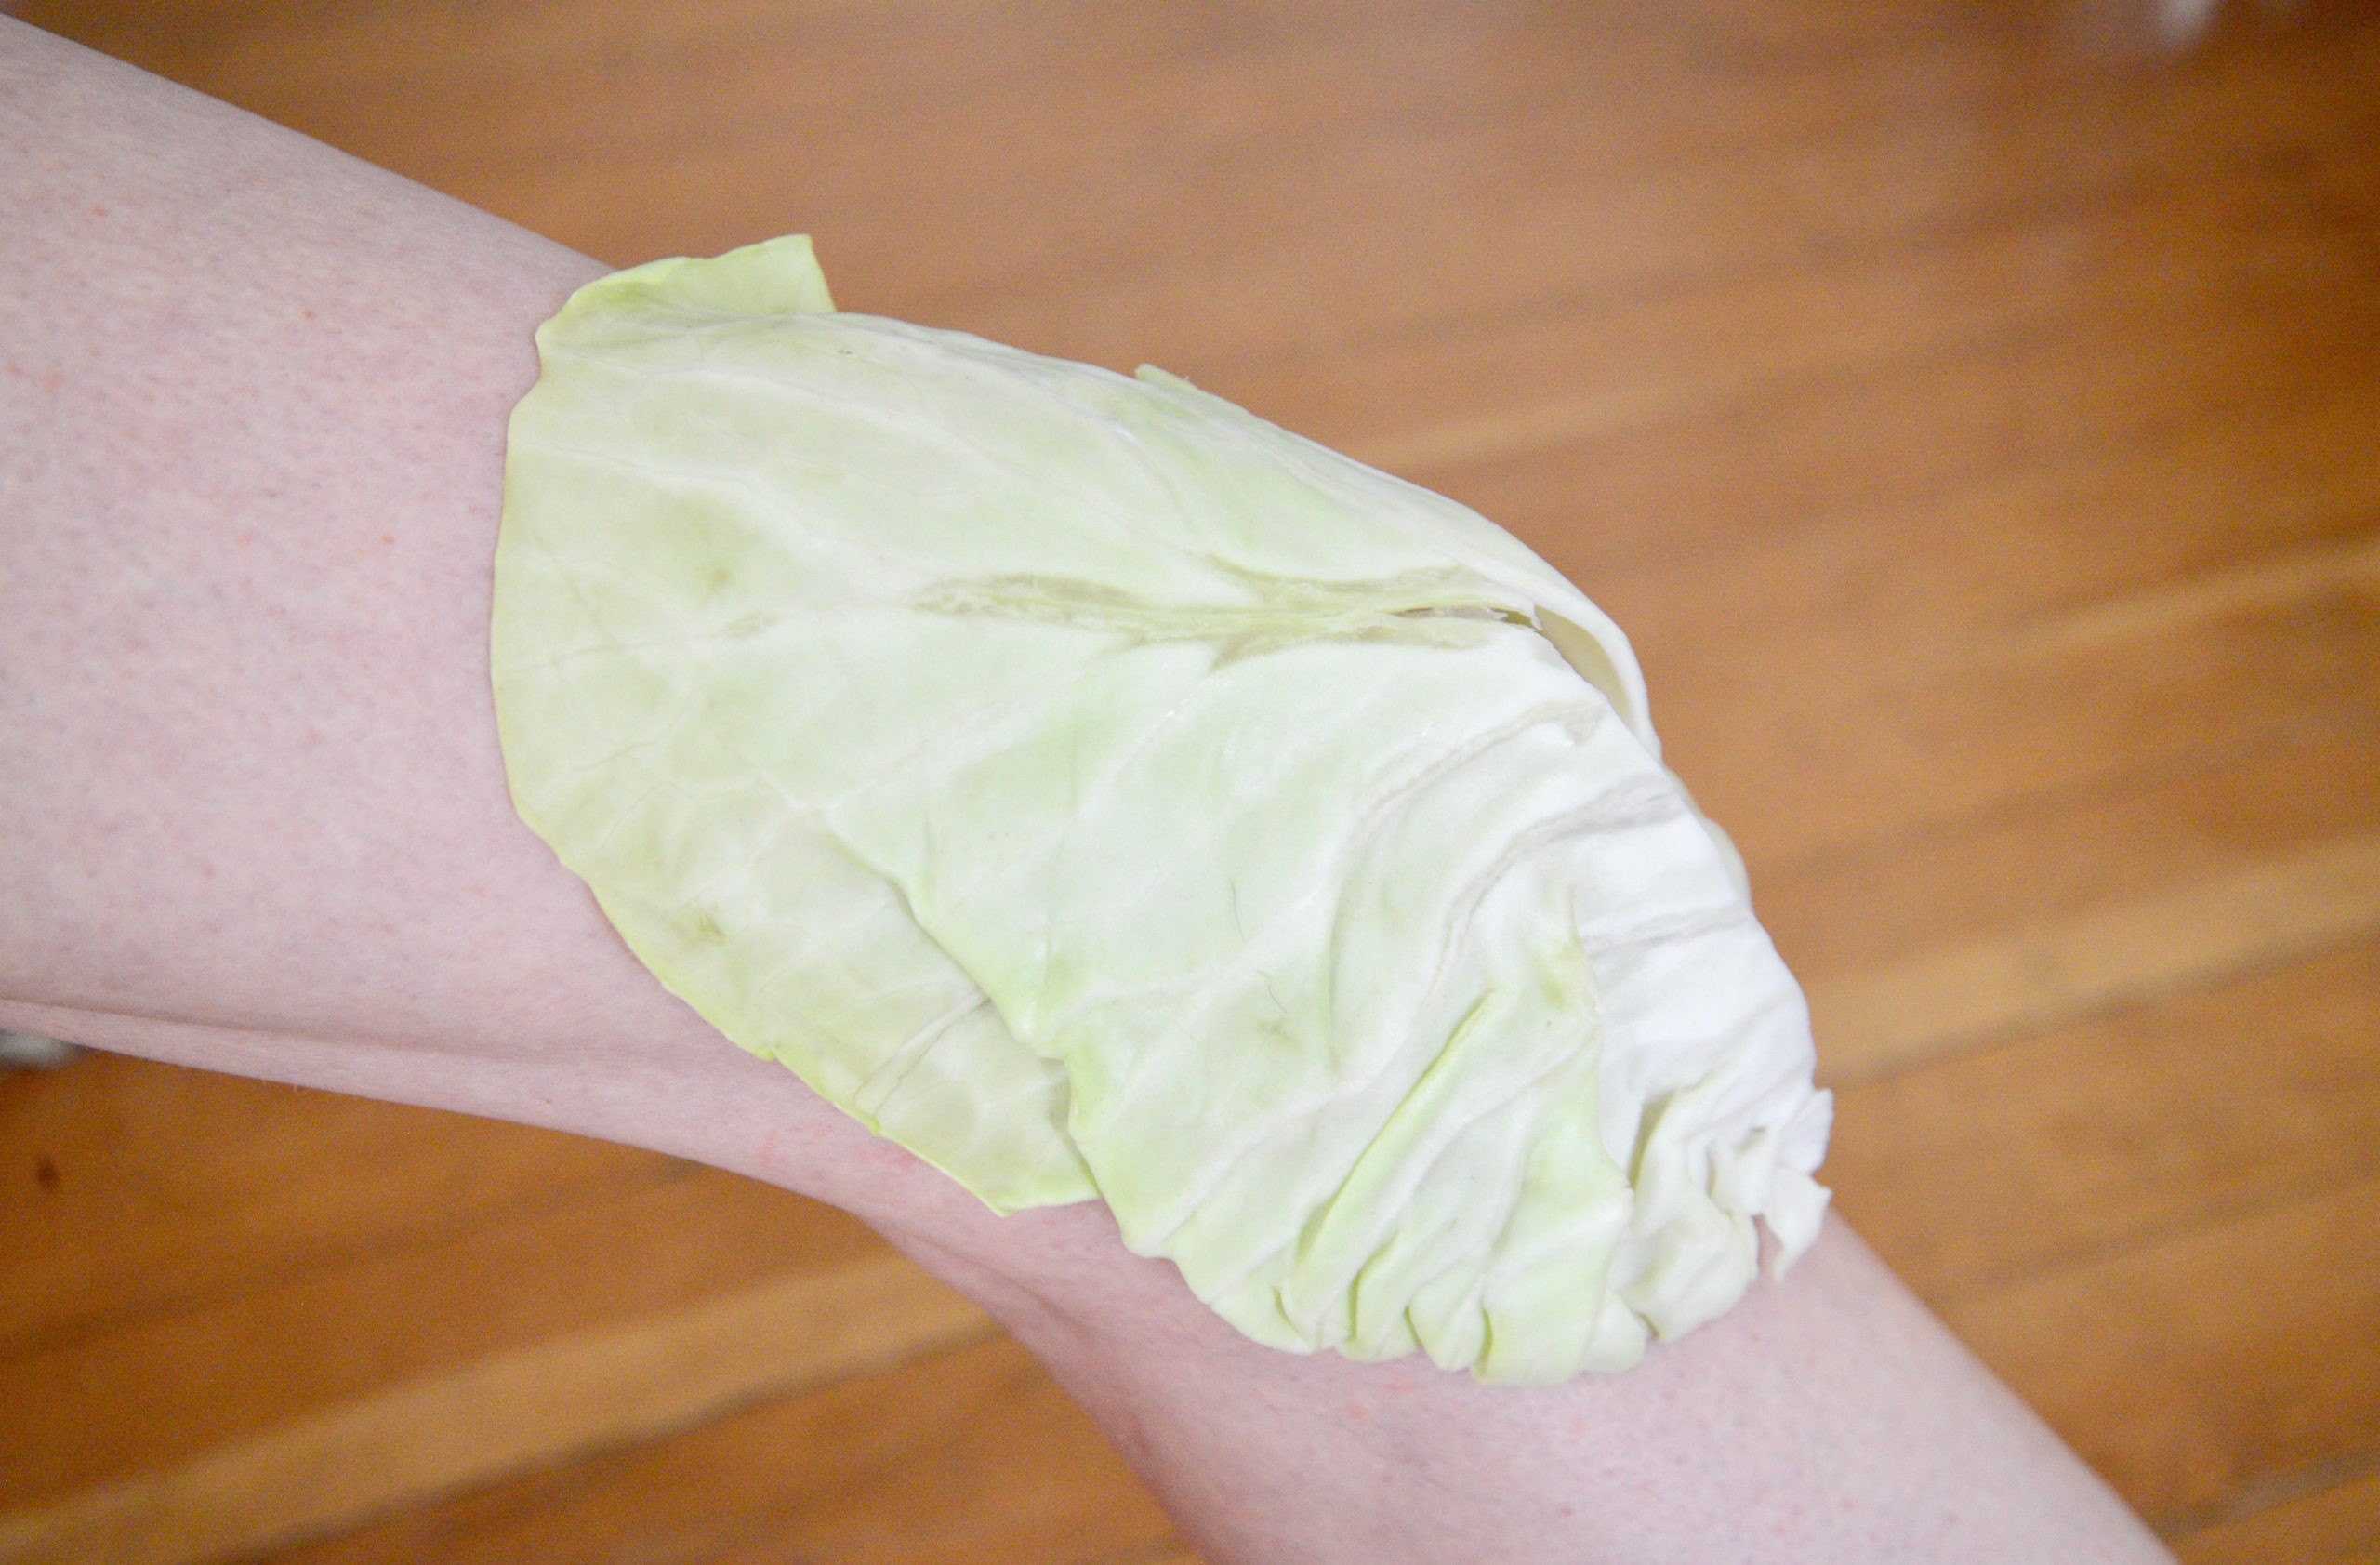 Cabbage Leaf Wrap for Joint Pain & Swelling